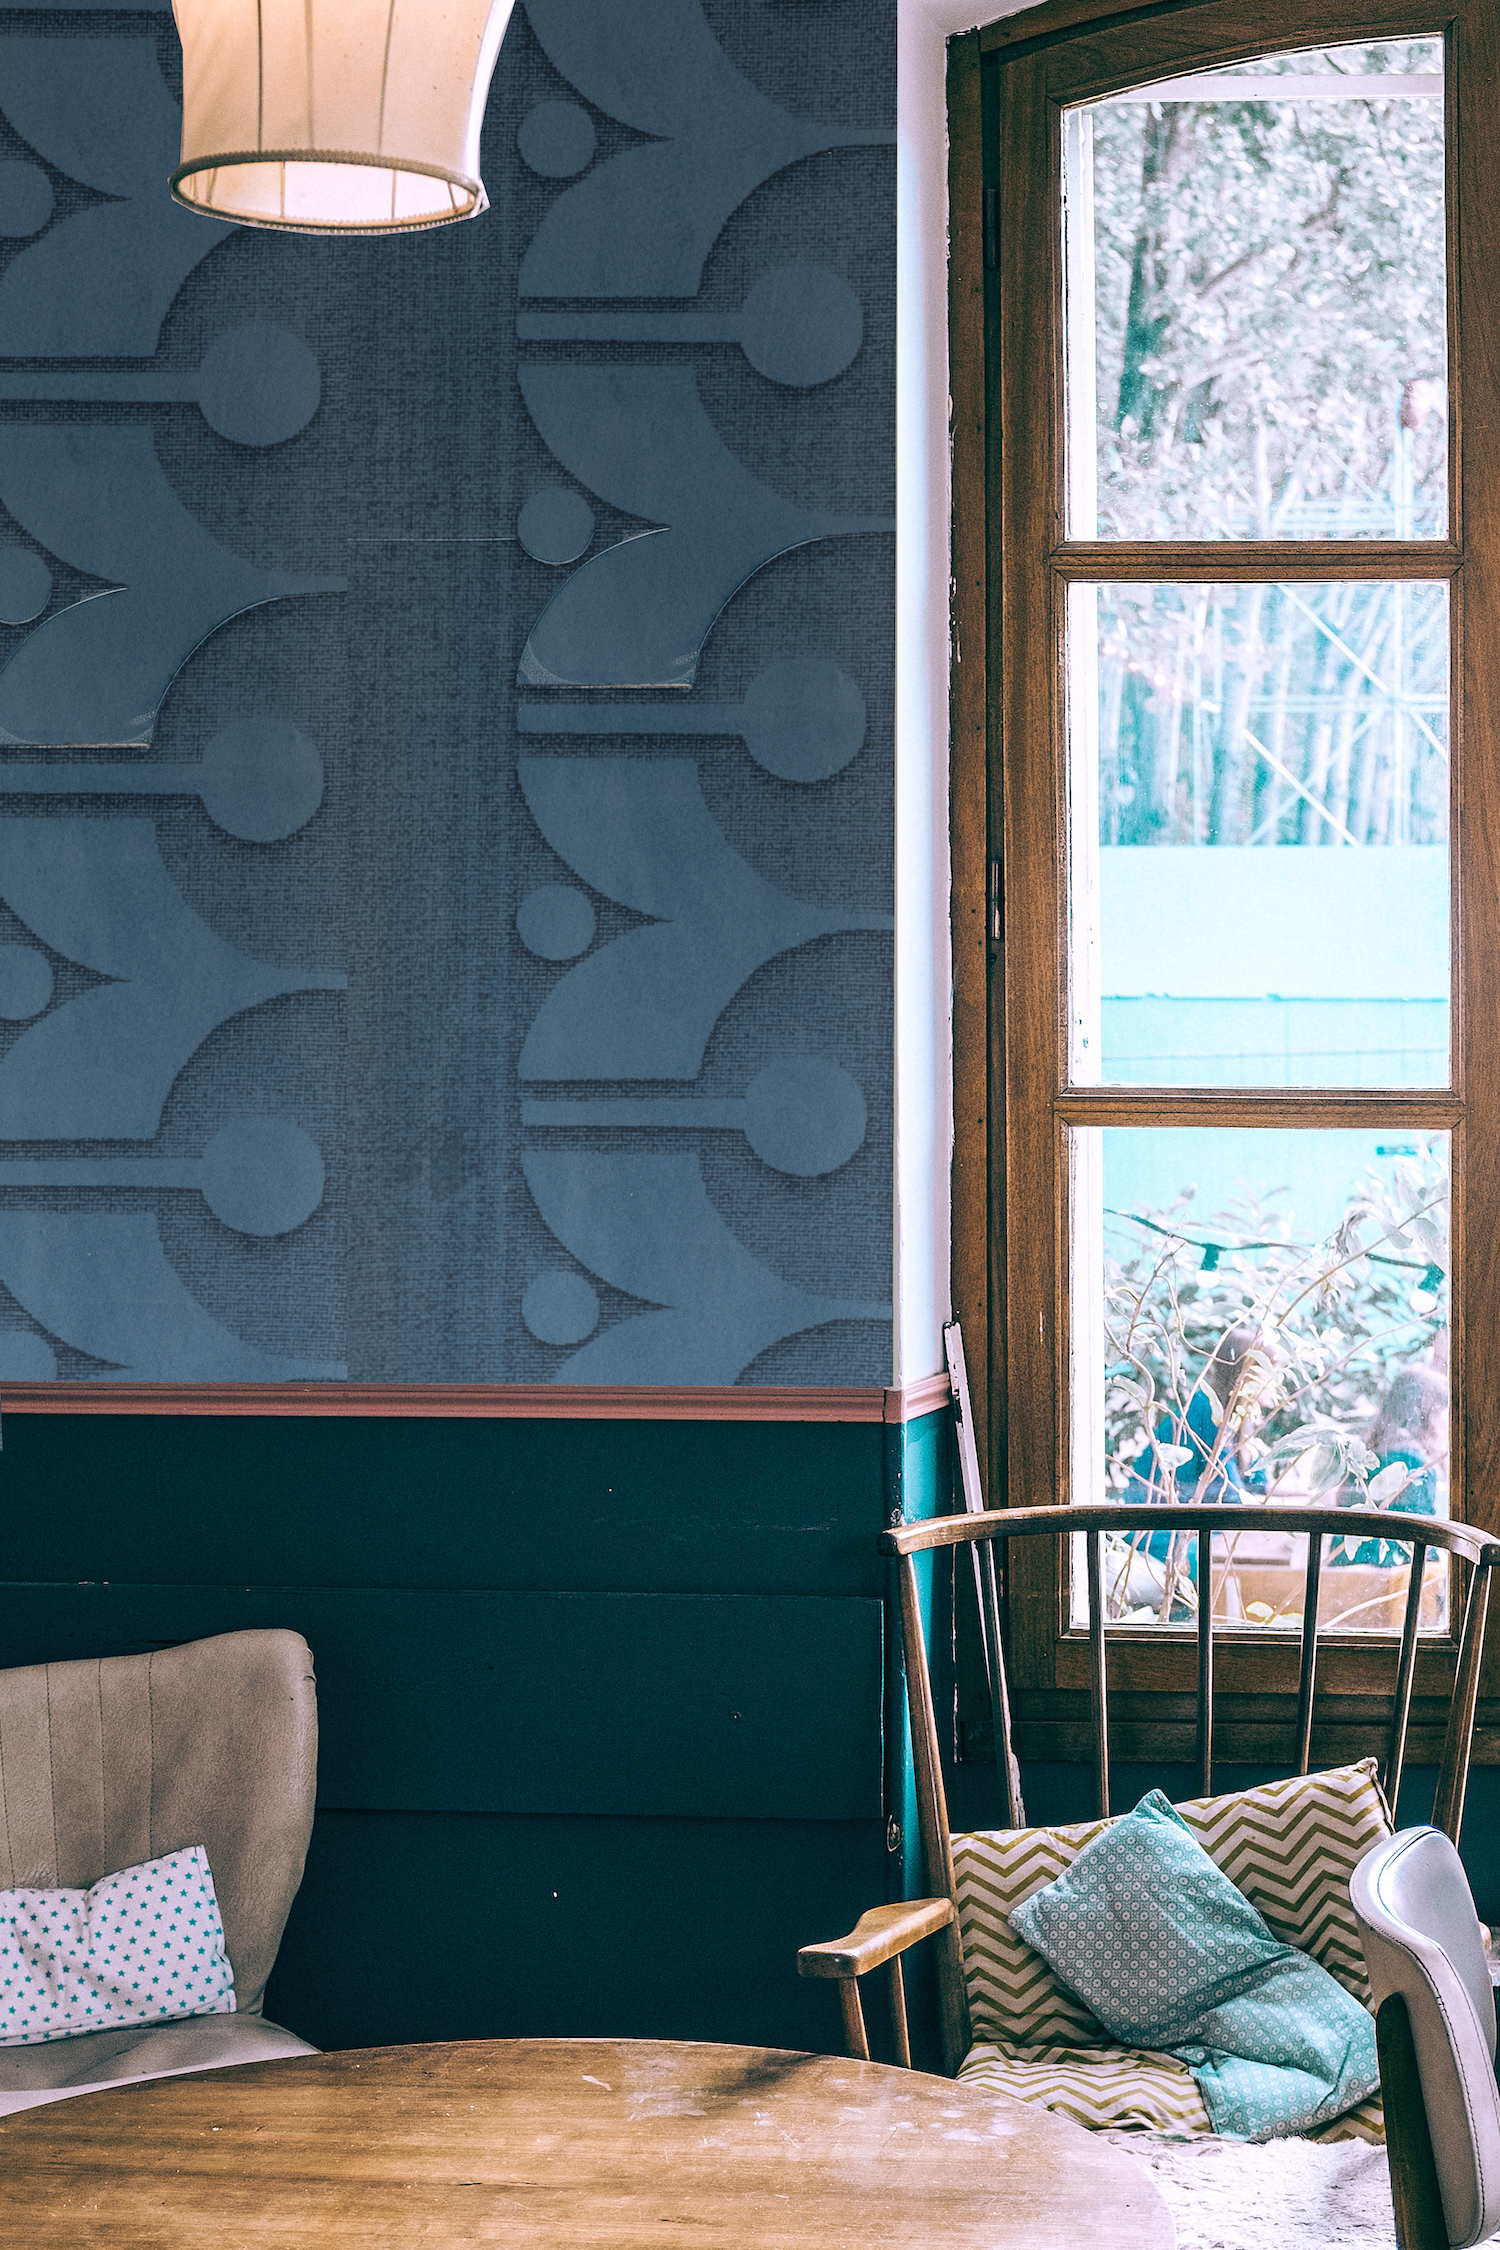 Heritage brands: Hornsea's designs influenced this wallpaper by Deborah Bowness for Heirloom - Effect Magazine